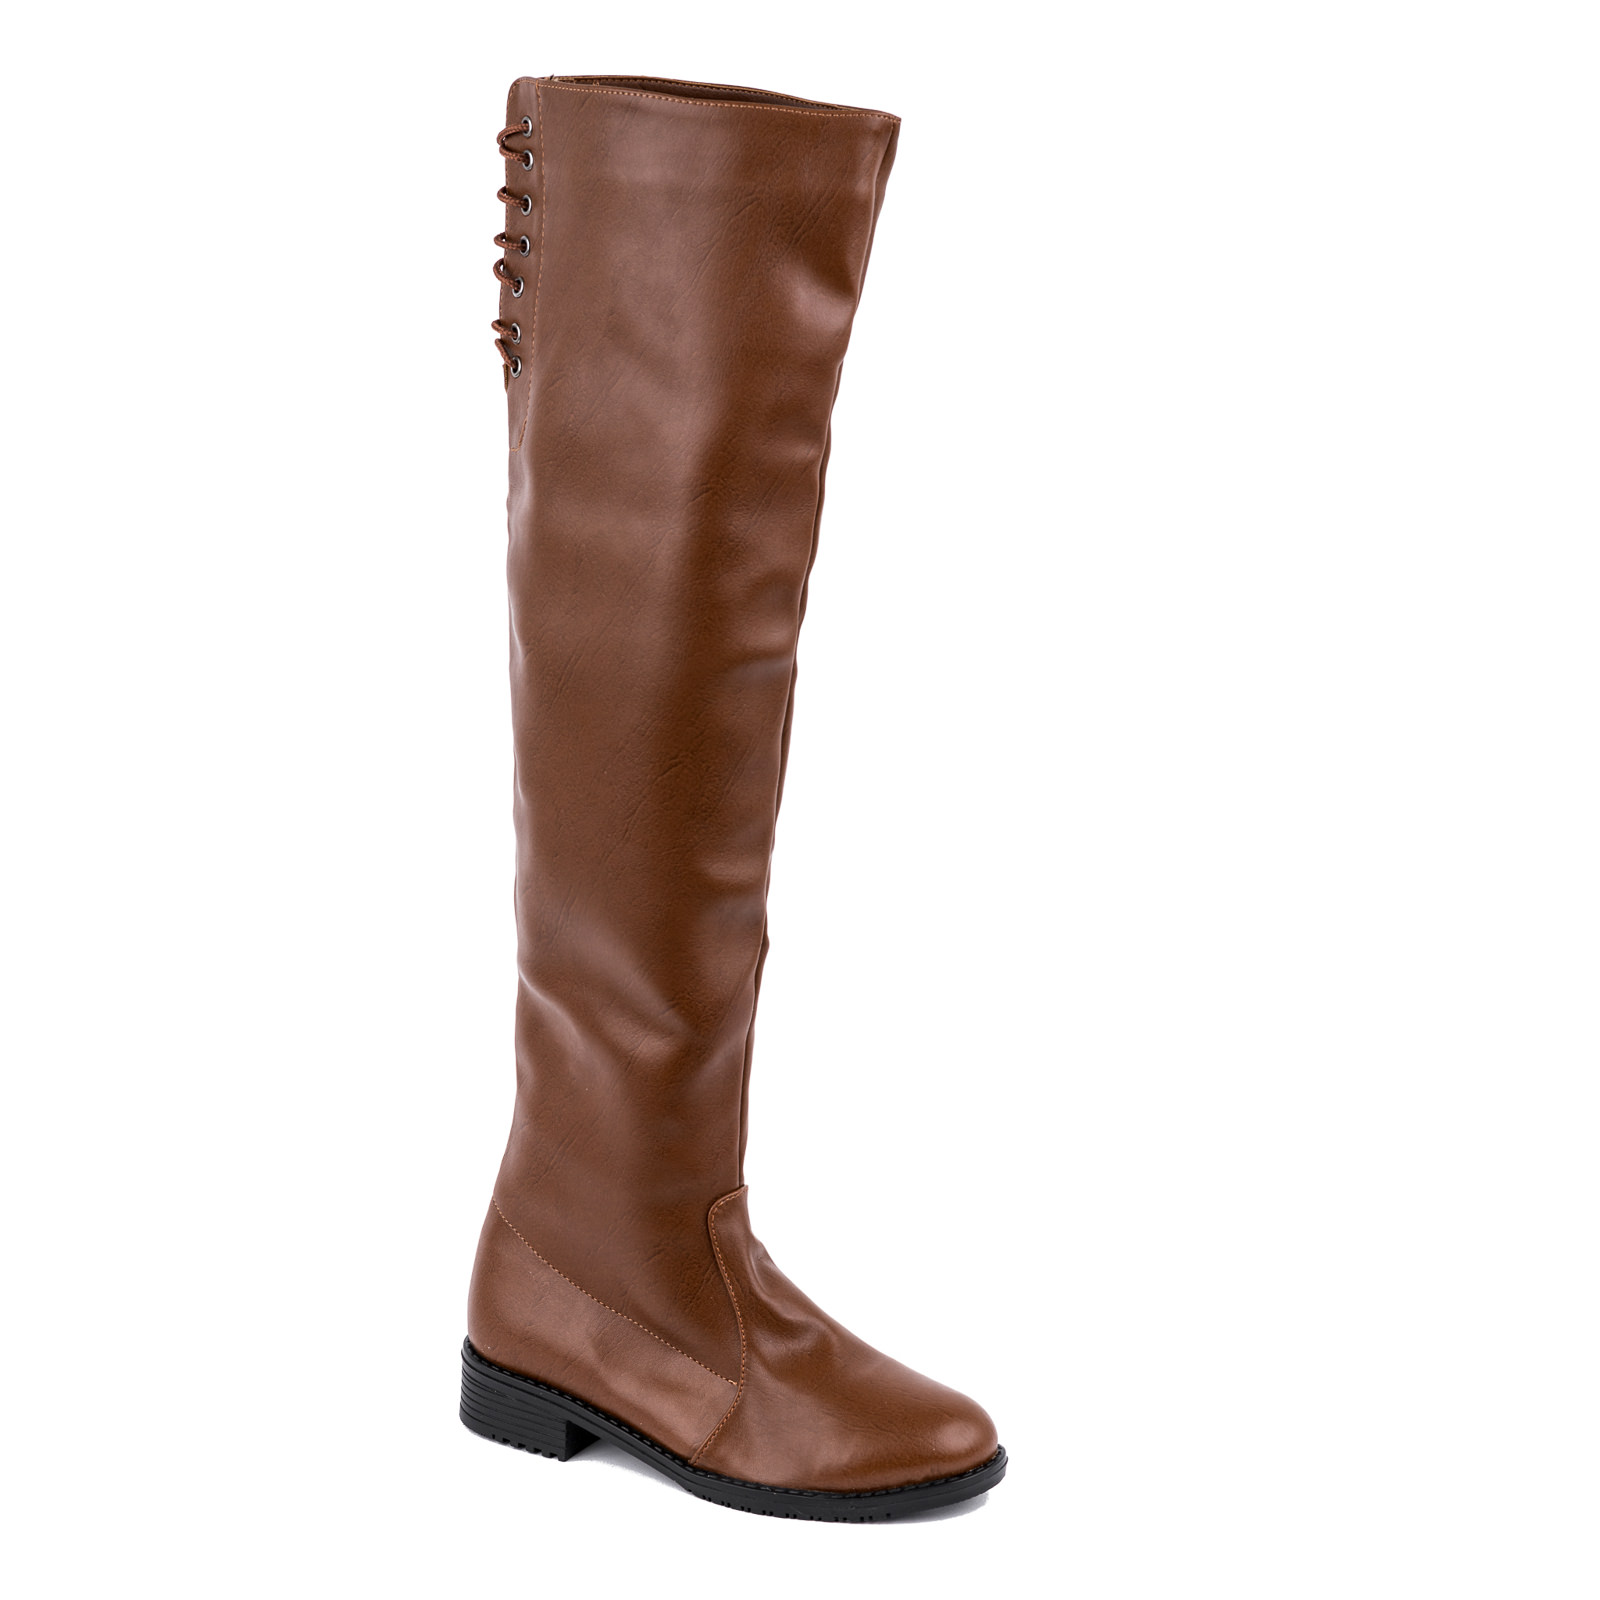 FLAT KNEE HIGH BOOTS WITH LACES - CAMEL